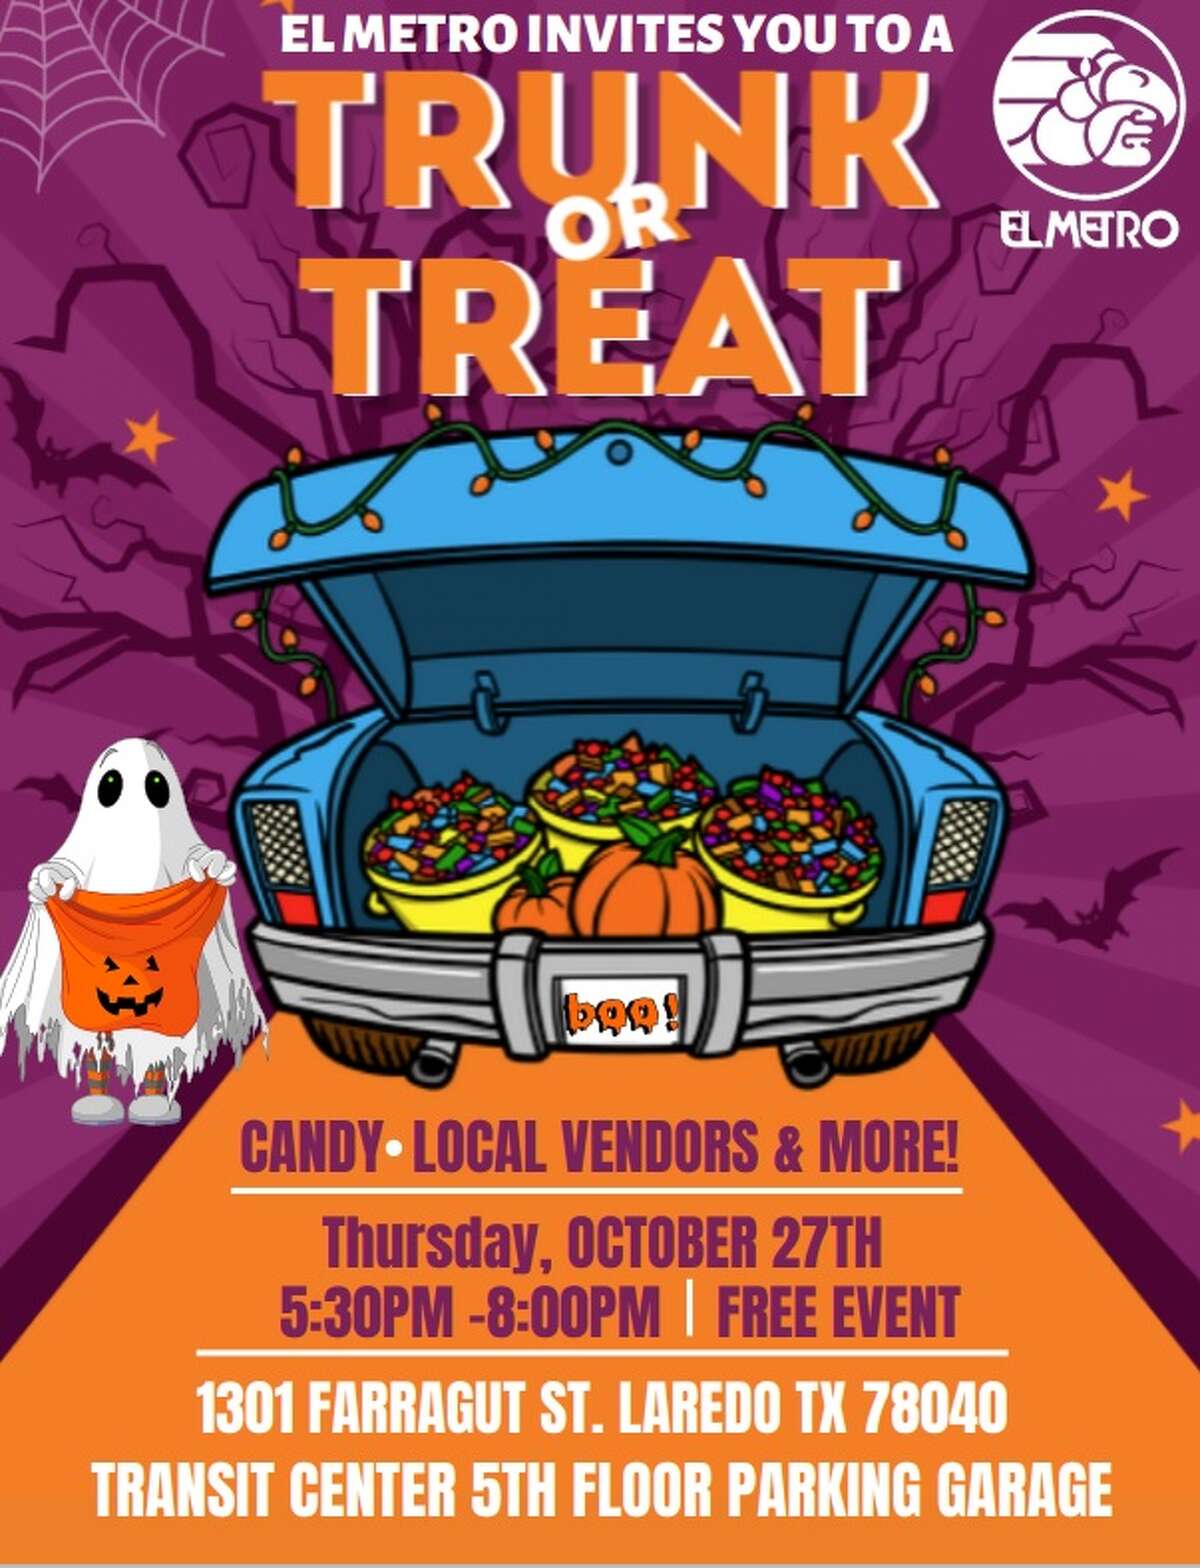 El Metro will host a Trunk or Treat event from 5:30-8 p.m. on Thursday, Oct. 27 at 1301 Farragut St.